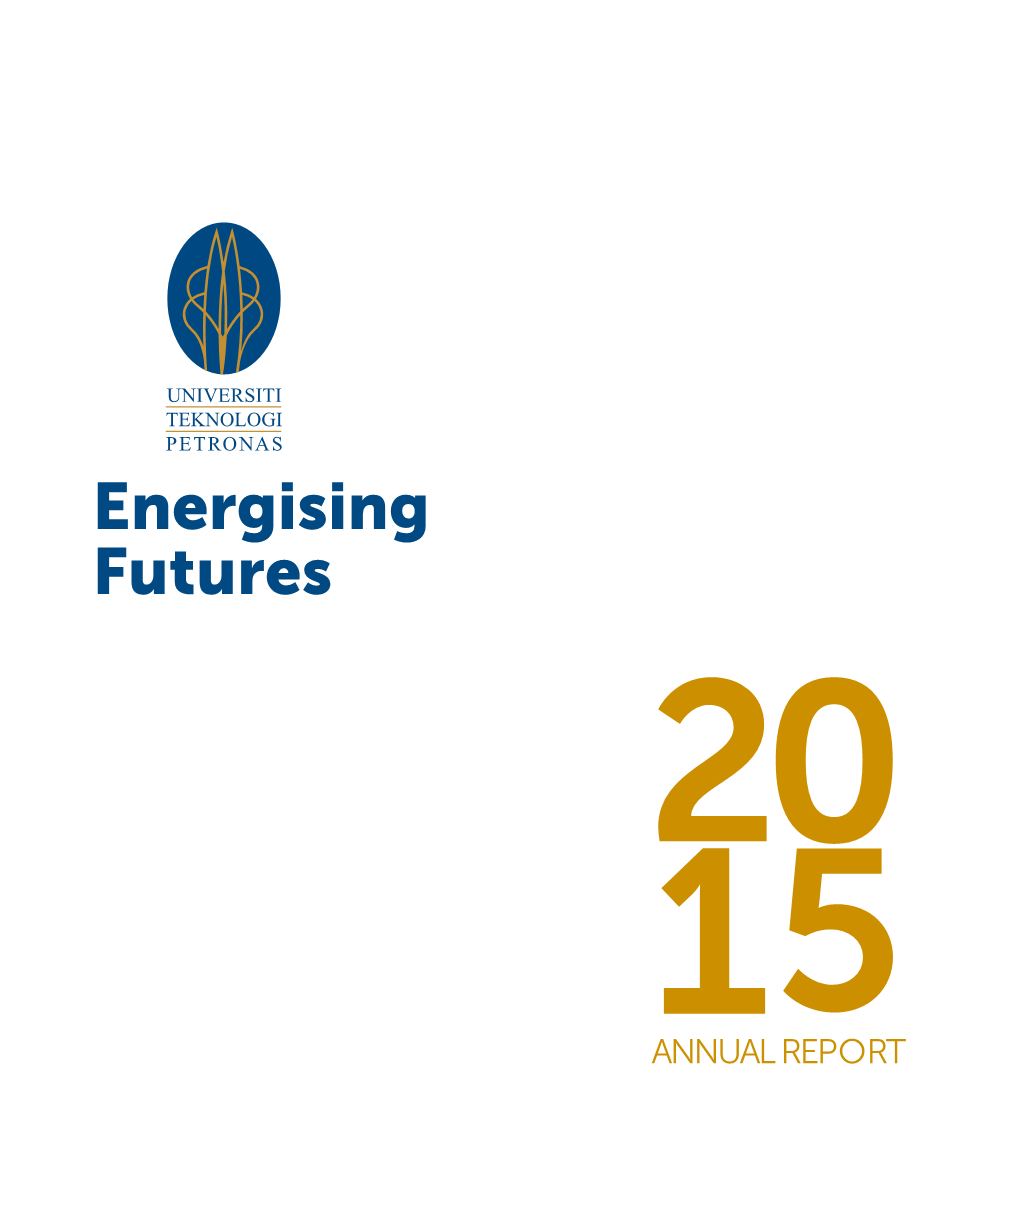 Energising Futures 20 15 ANNUAL REPORT Annual Report for the Period 1 January to 31 December 2015 CONCEPT RATIONALE